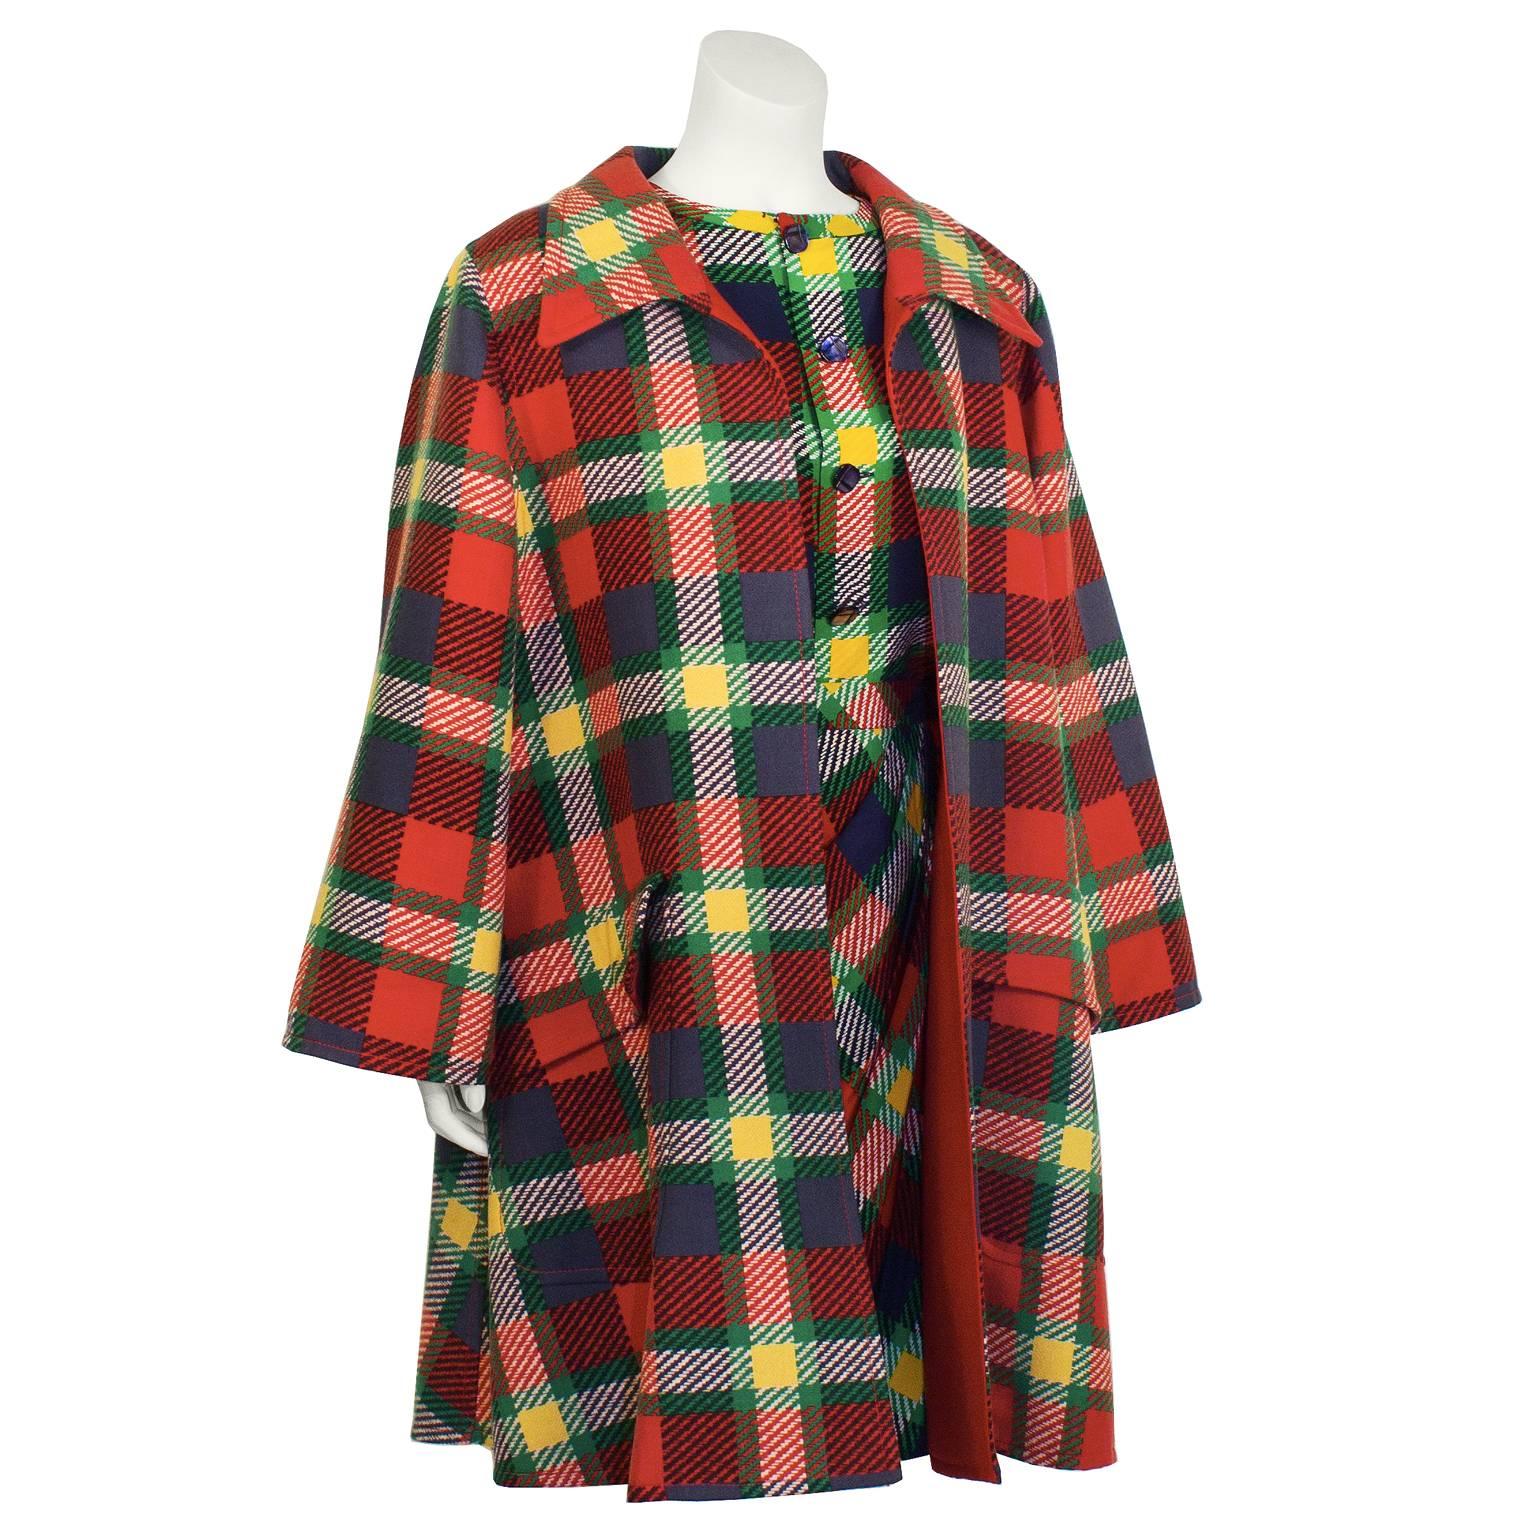 Chic 1980's Valentino vibrant plaid ensemble including a silk blouse, skirt, and adorable A-line coat. Long sleeve blouse has a front button and frilled cuffs. Skirt is a faux wrap with a side zip closure. A-line coat features a wide collar, and two